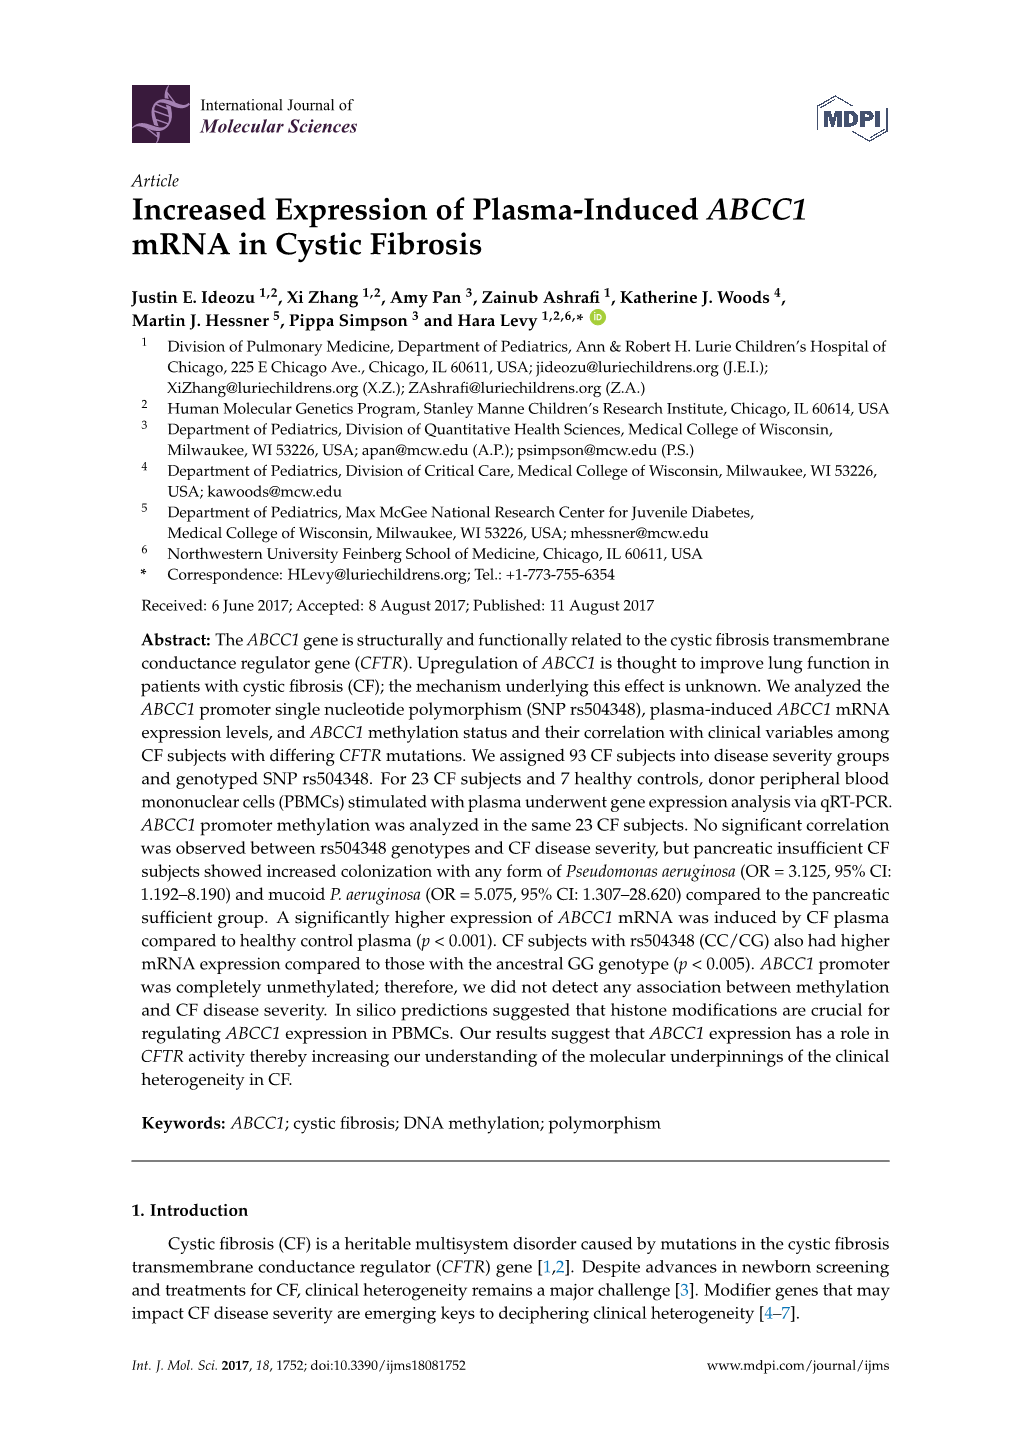 Increased Expression of Plasma-Induced ABCC1 Mrna in Cystic Fibrosis